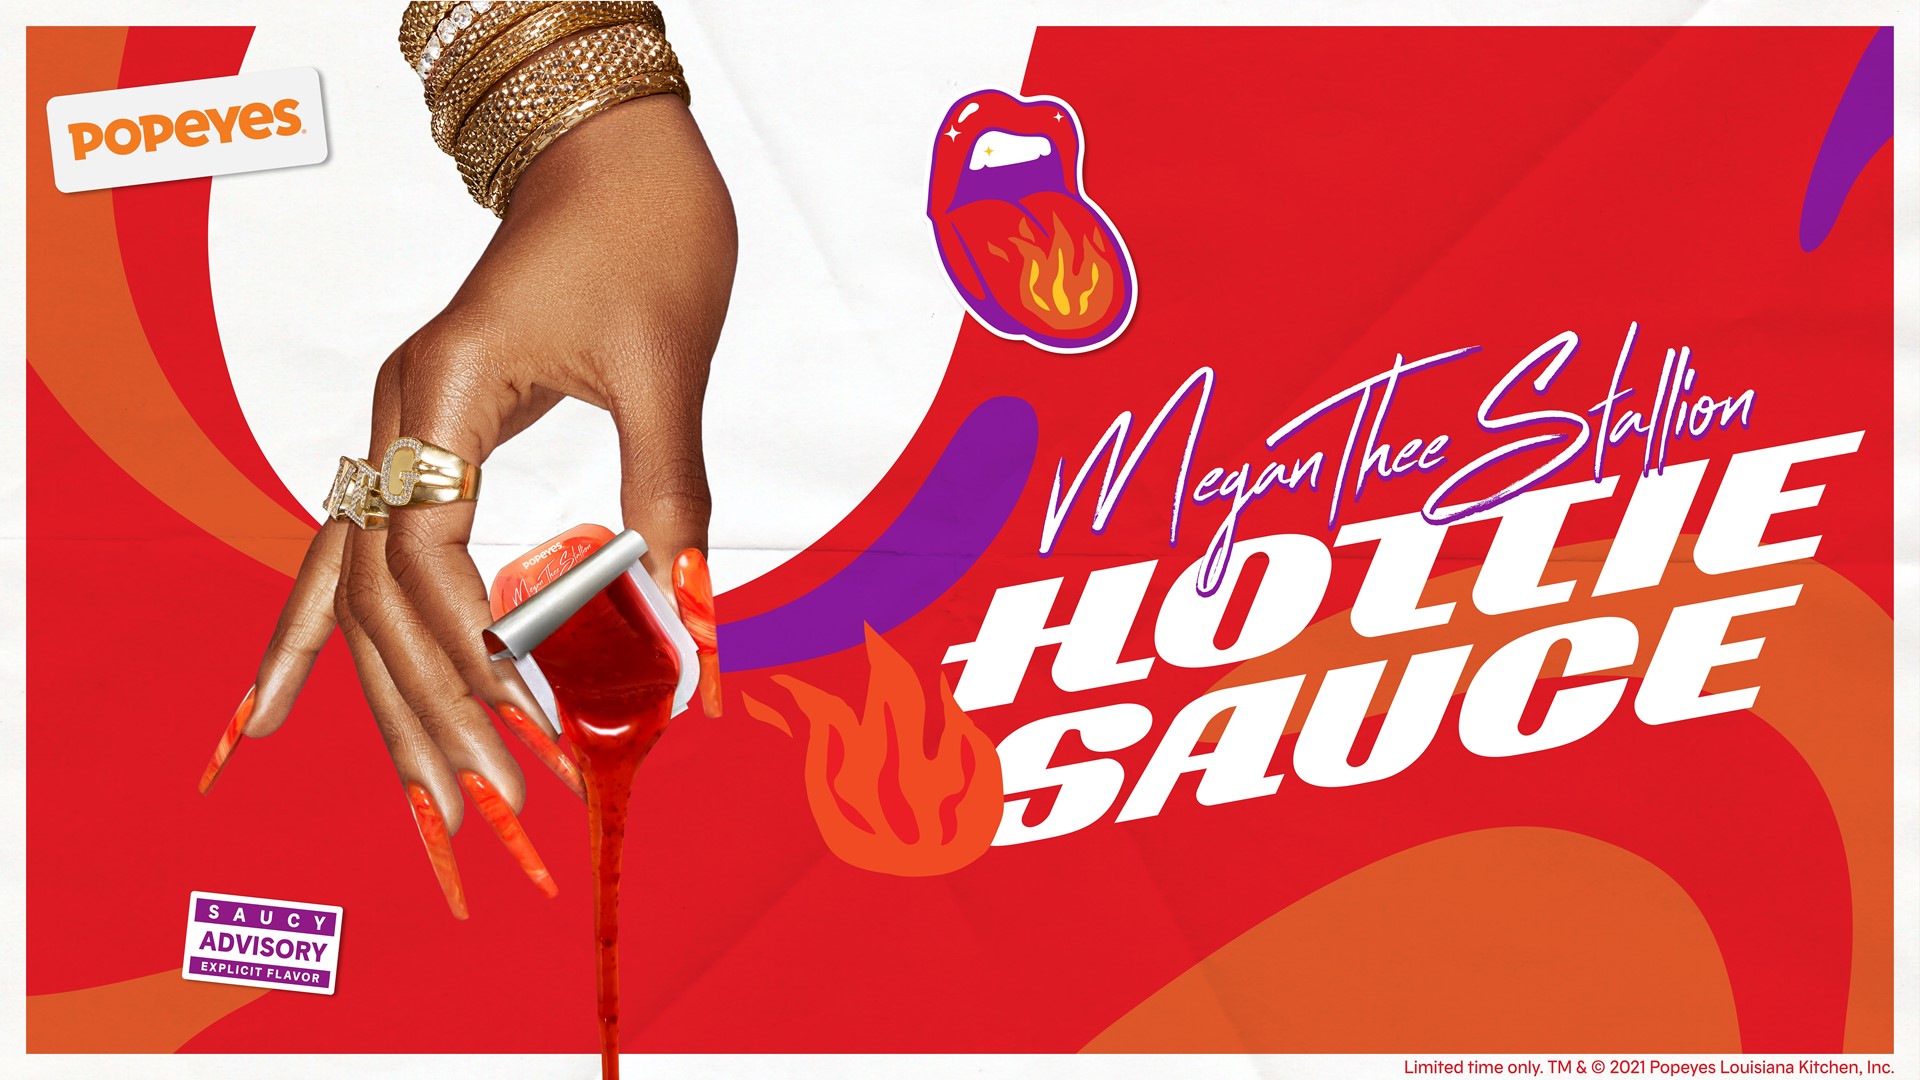 Houston's Megan Thee Stallion has teamed up with Popeyes to create a "Hottie Sauce." The rapper is also a franchise owner.